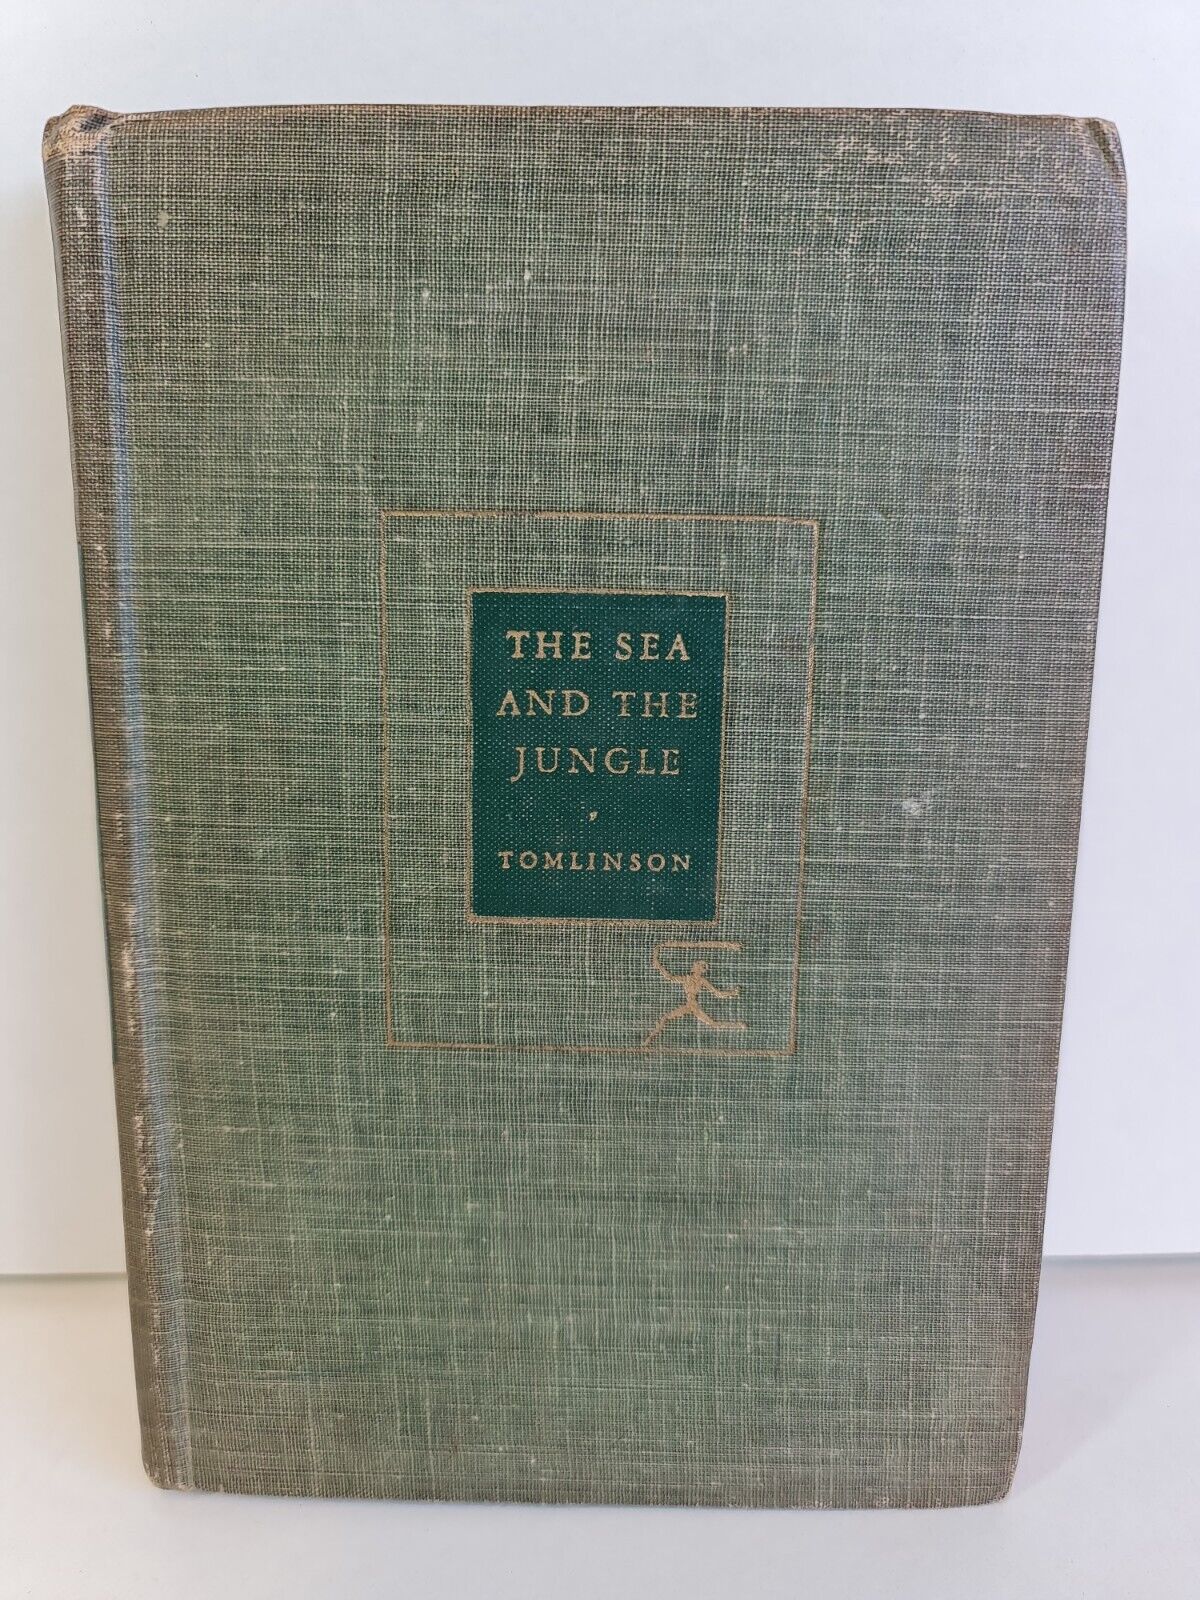 The Sea And The Jungle by H M Tomlinson (1928)